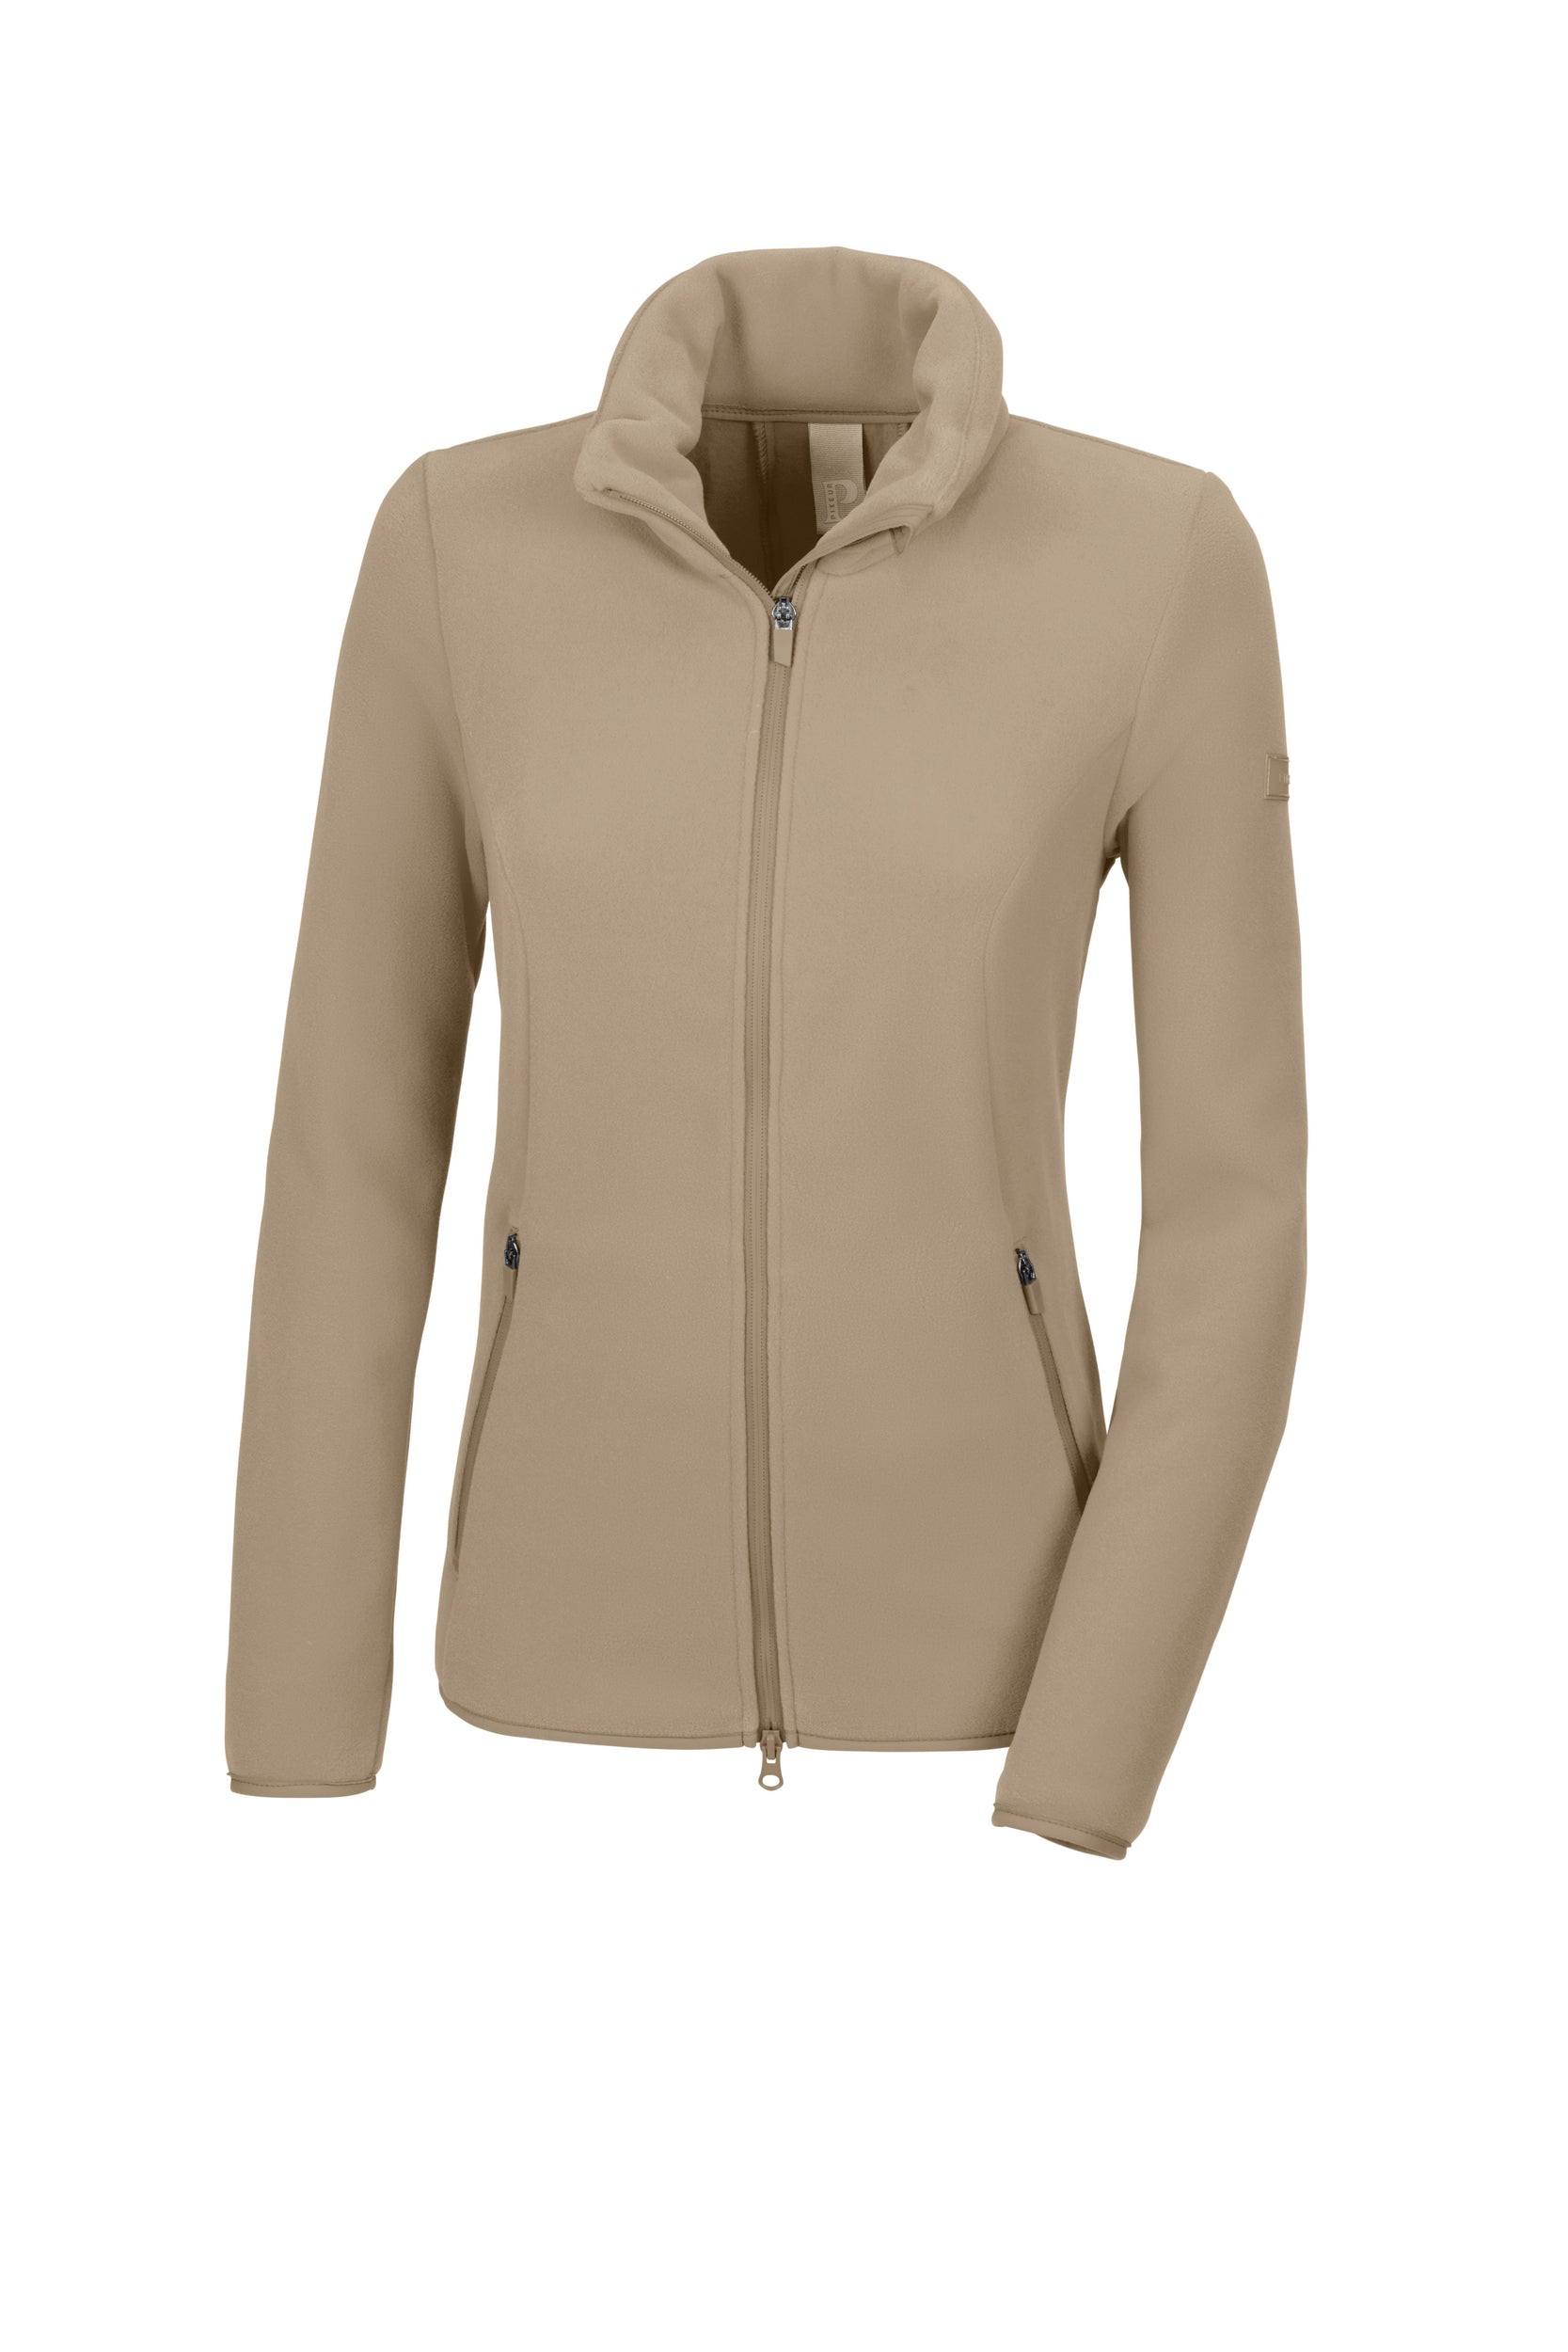 Pikeur sports fleece jacket in Soft Taupe